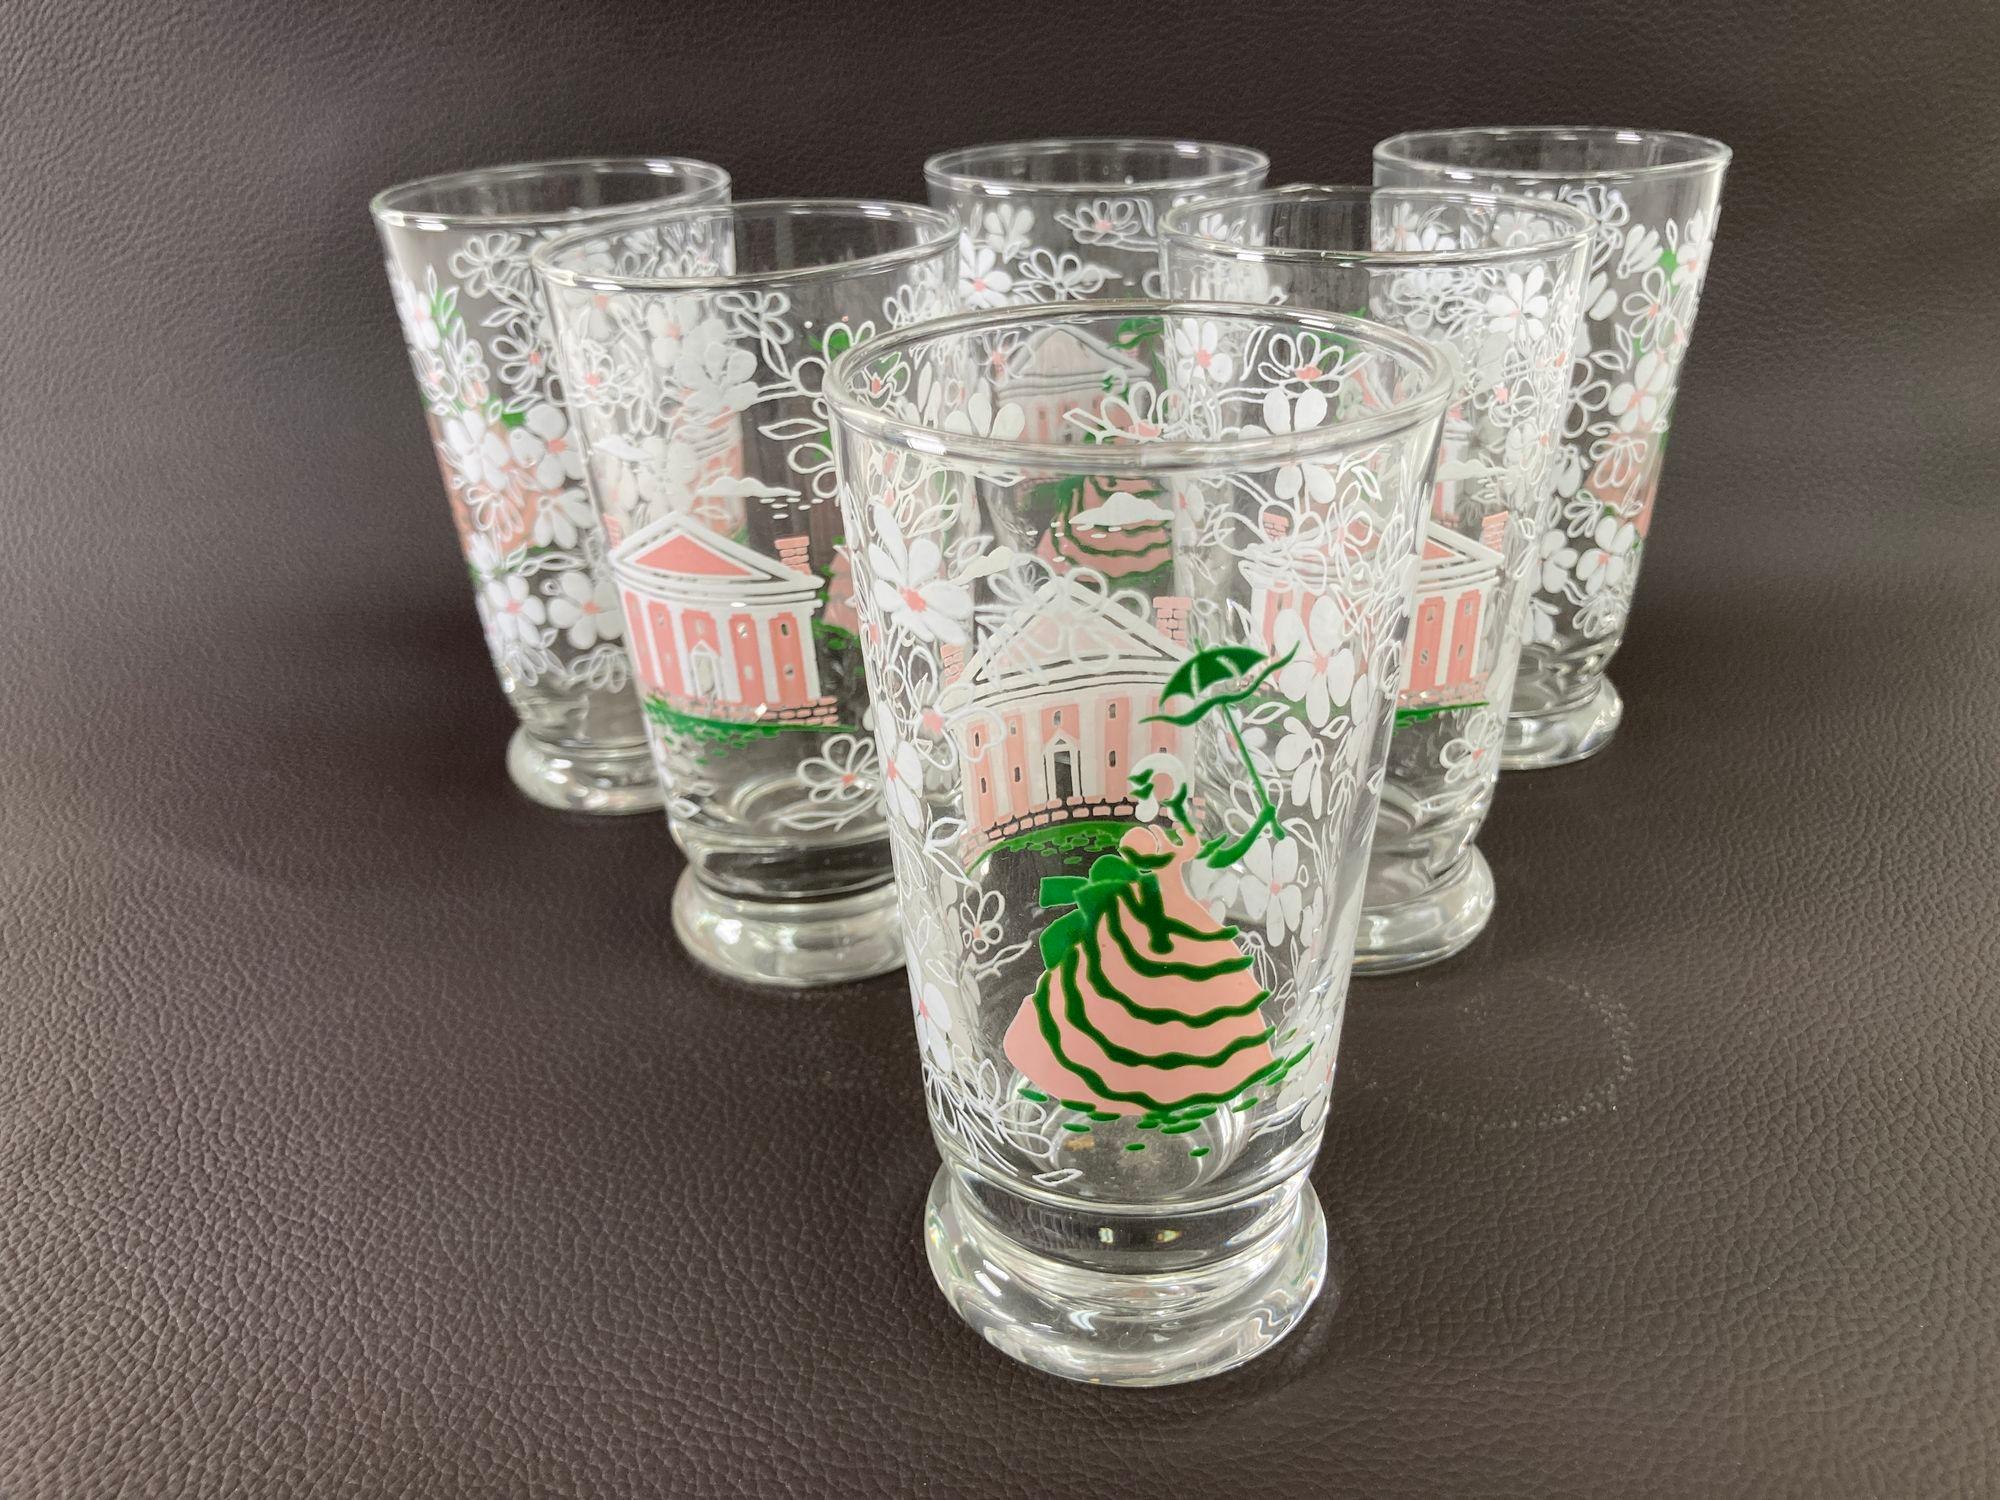 Vintage 1950s Libbey Southern Belle Magnolia Glass Tumblers Set of 6.
KENTUCKY DERBY Time LIBBEY Southern Belle Barware Collectible Glasses Mint.
LIBBEY 